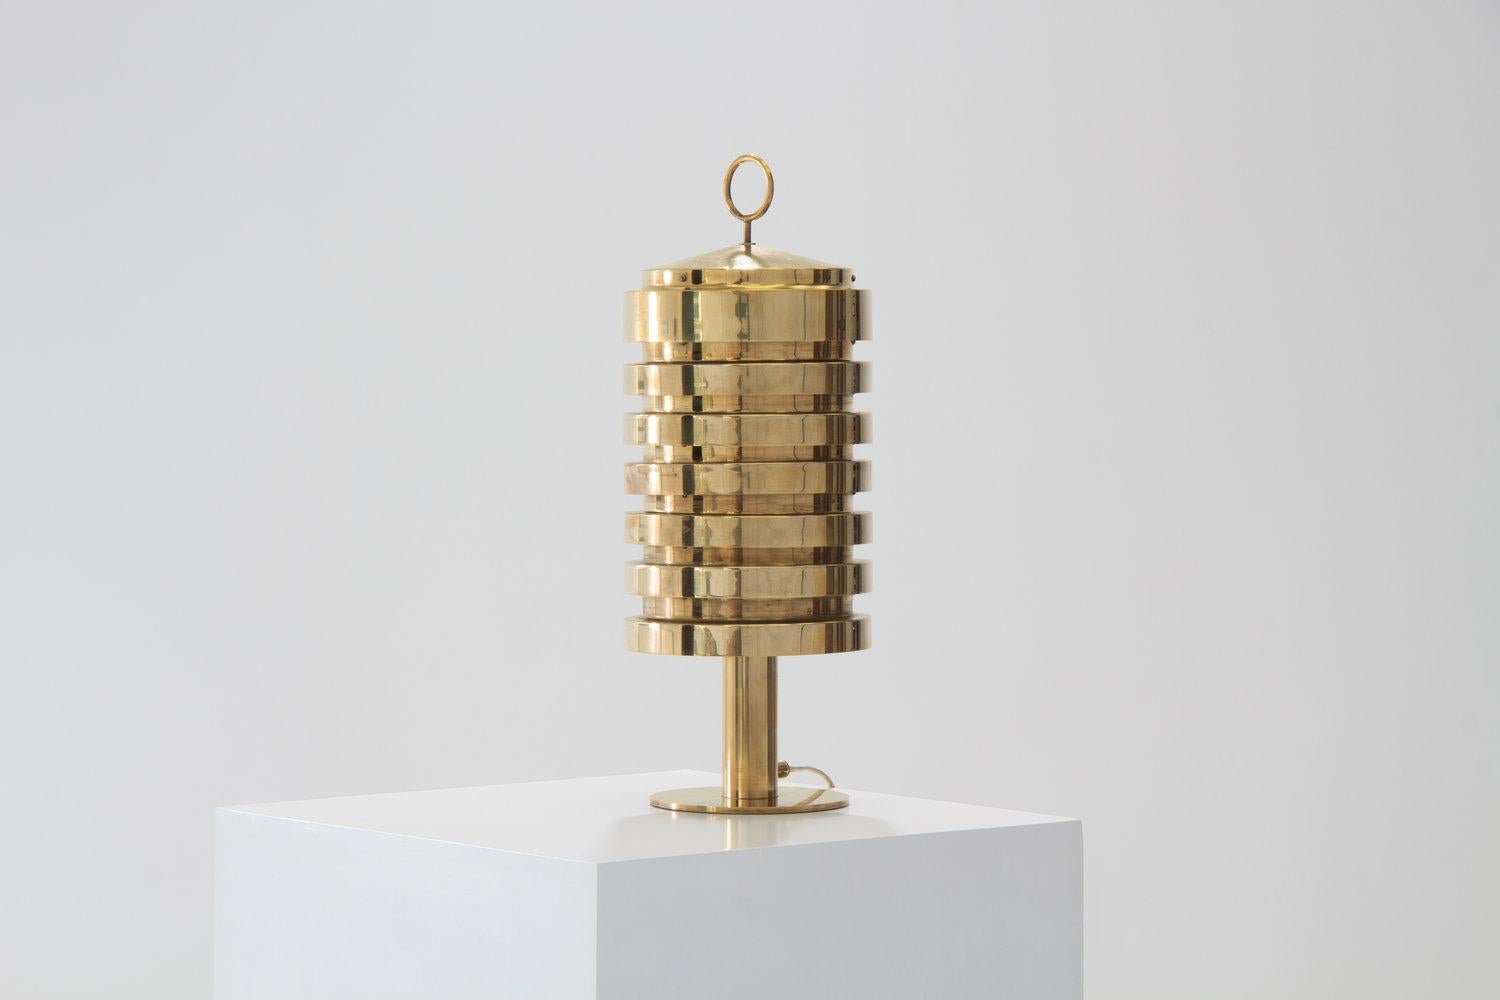 Rare Hans-Agne Jakobsson B-99 table lamp in enameled brass, Sweden, 1950s.

This exceptional Hans-Agne Jakobsson B 99 table lamp that resembles a shimmering beehive, consists of seven individual cylindrical brass elements that together create a